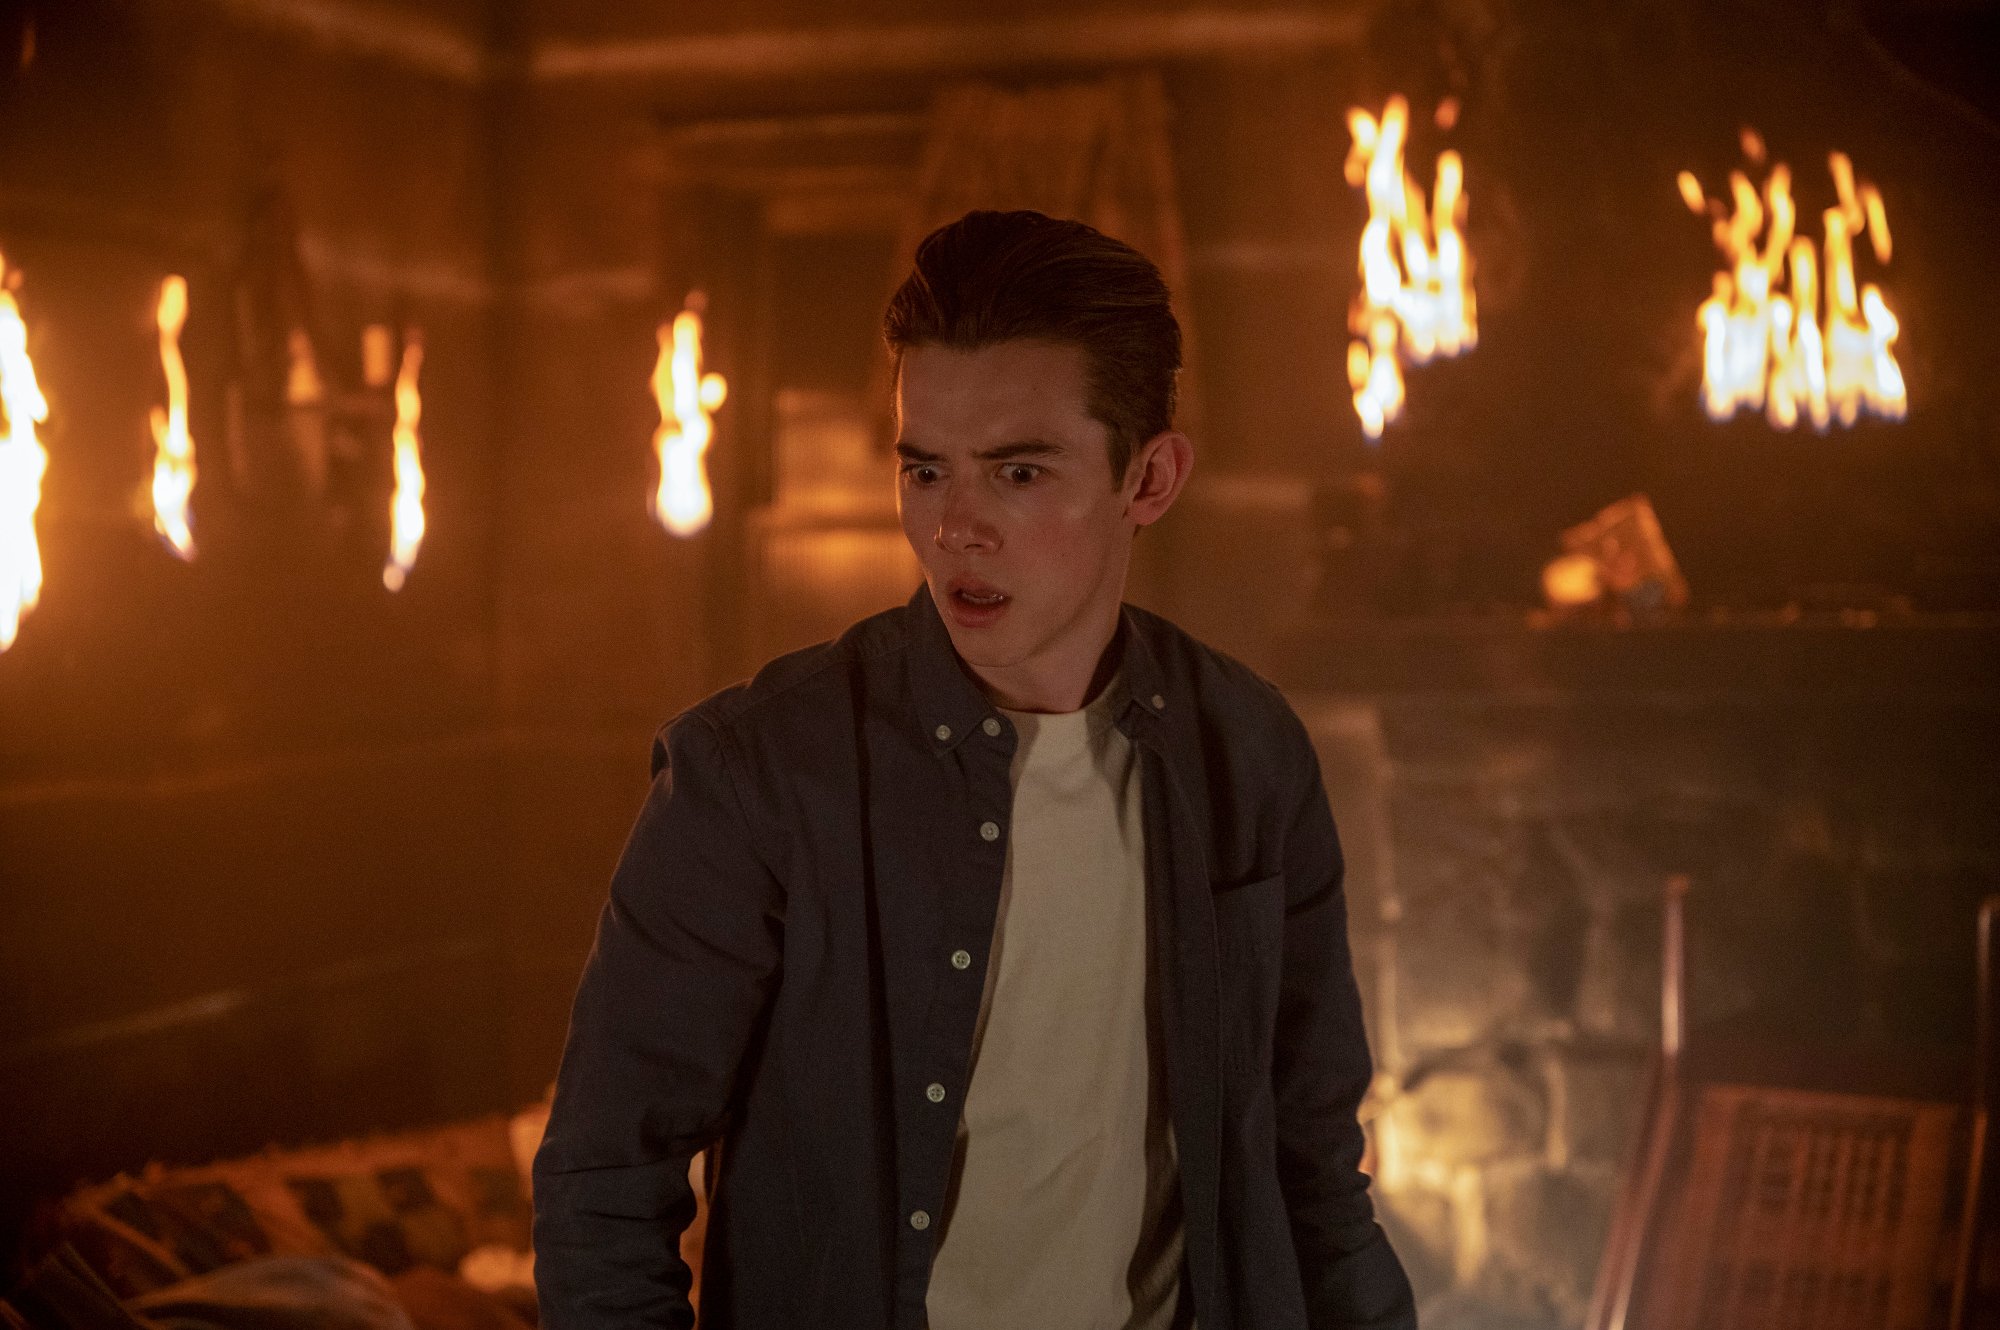 Griffin Gluck as Gabe in 'Locke & Key' Season 2. There's fire around him and he looks angry and surprised.